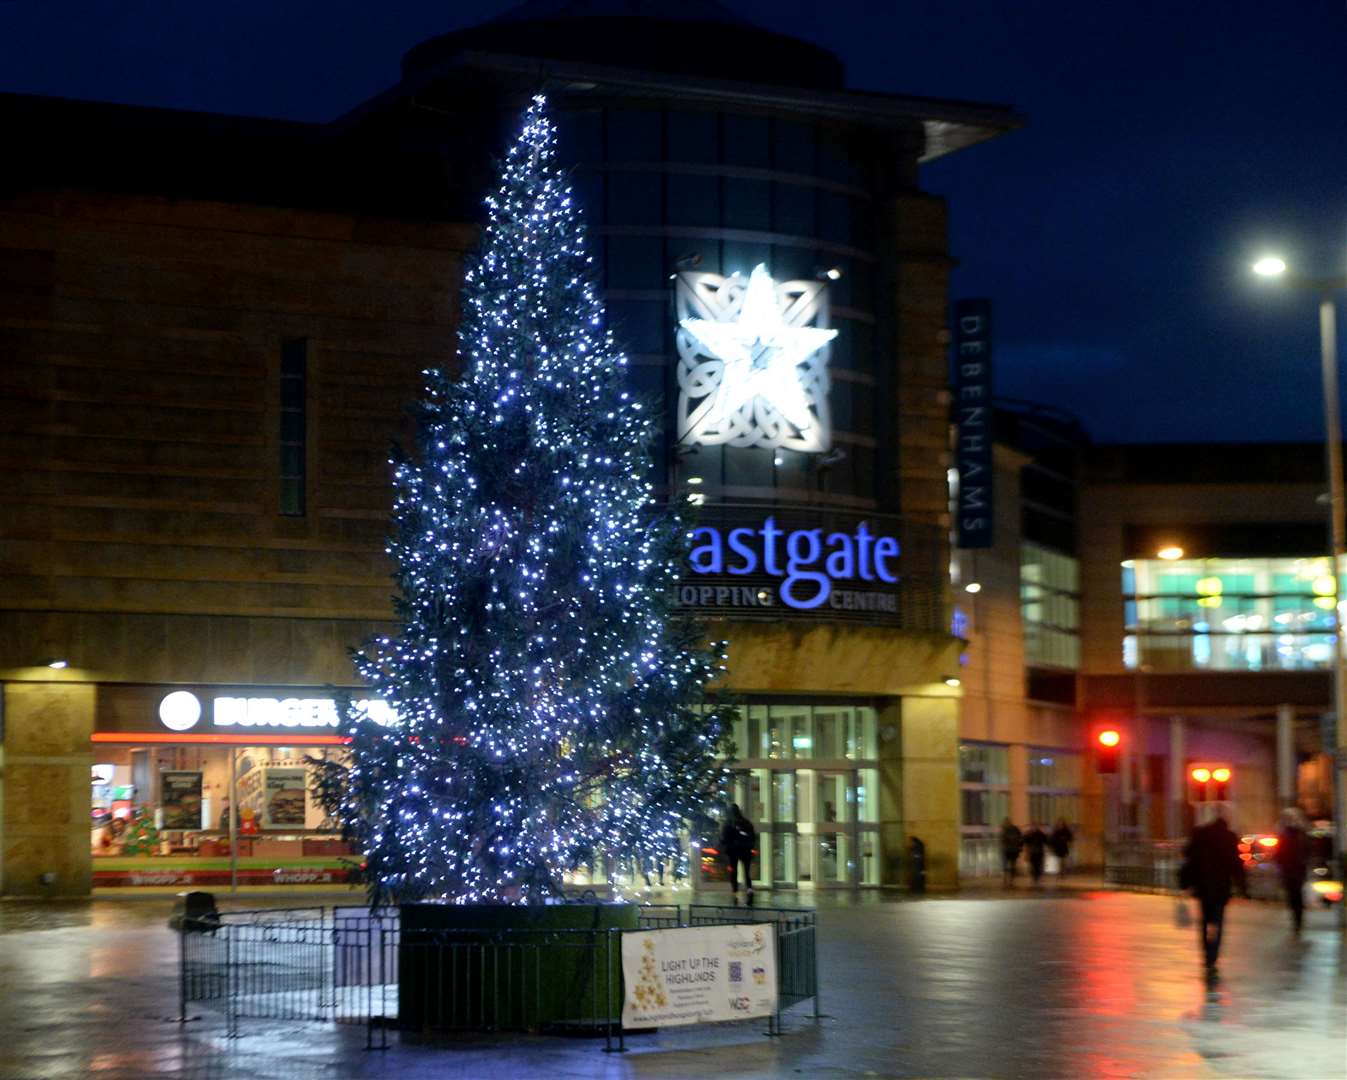 The Christmas tree in Falcon Square outside the Eastgate Shopping Centre.